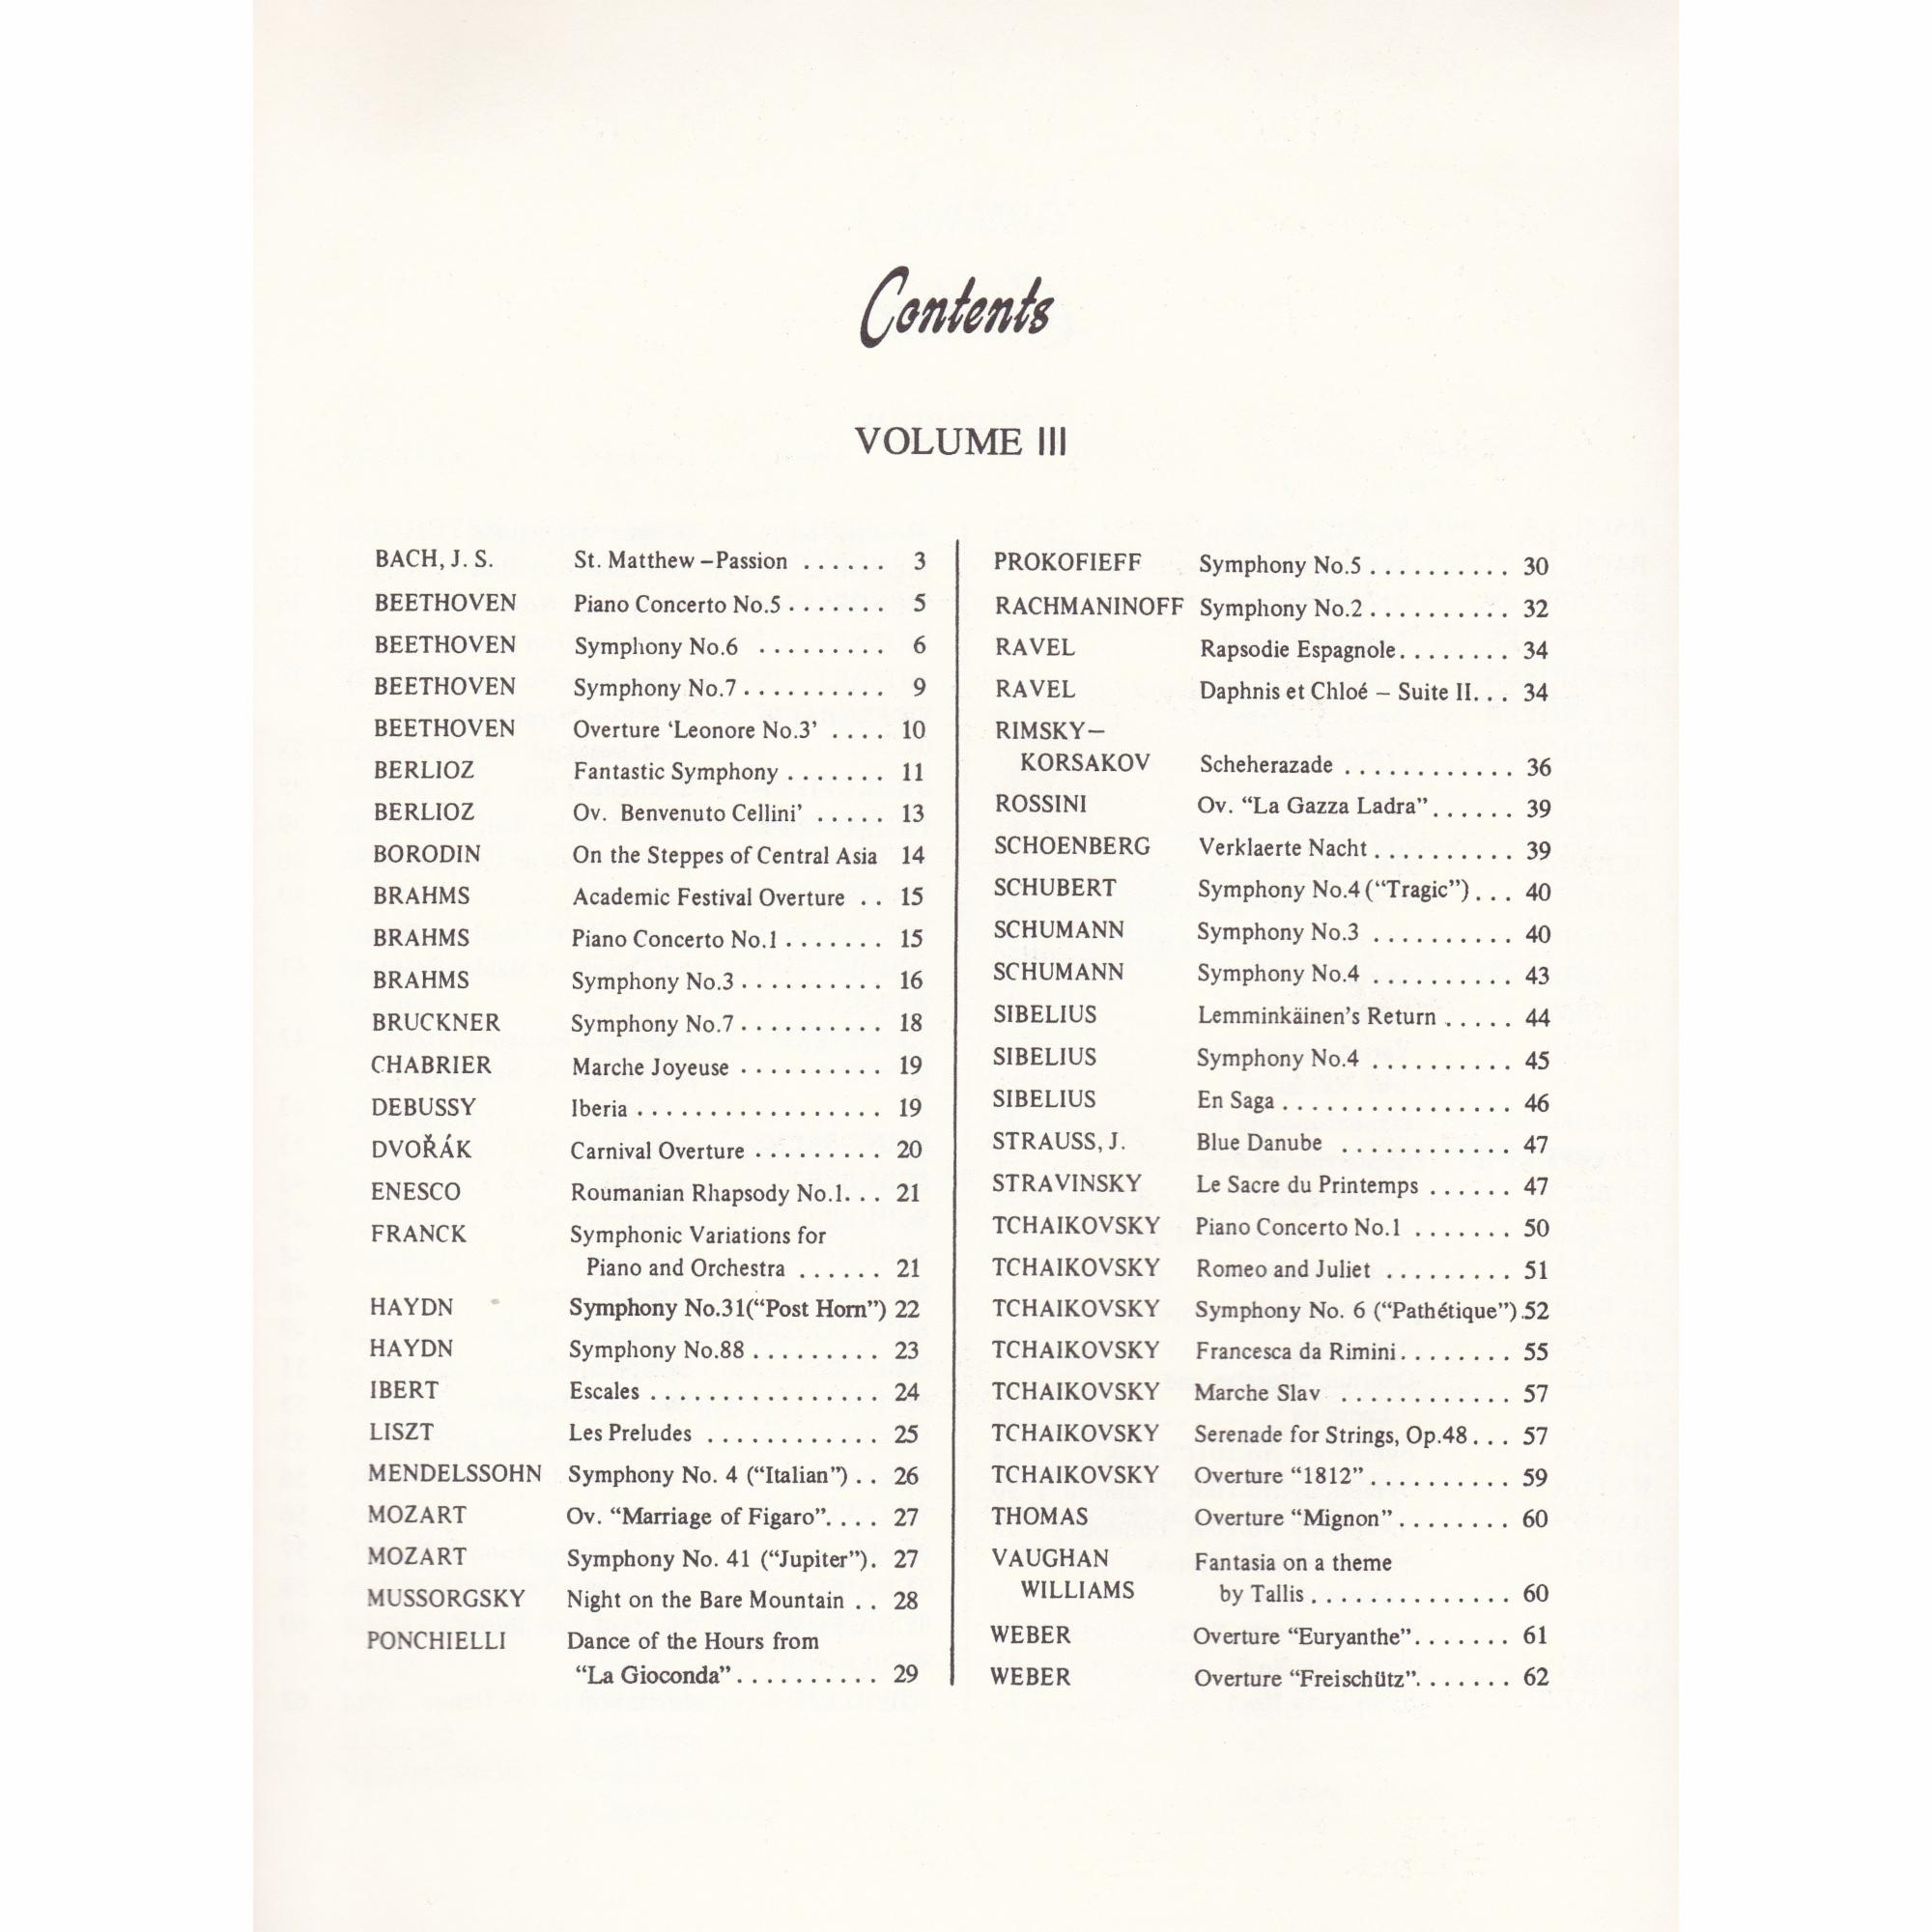 Volume III Table of Contents